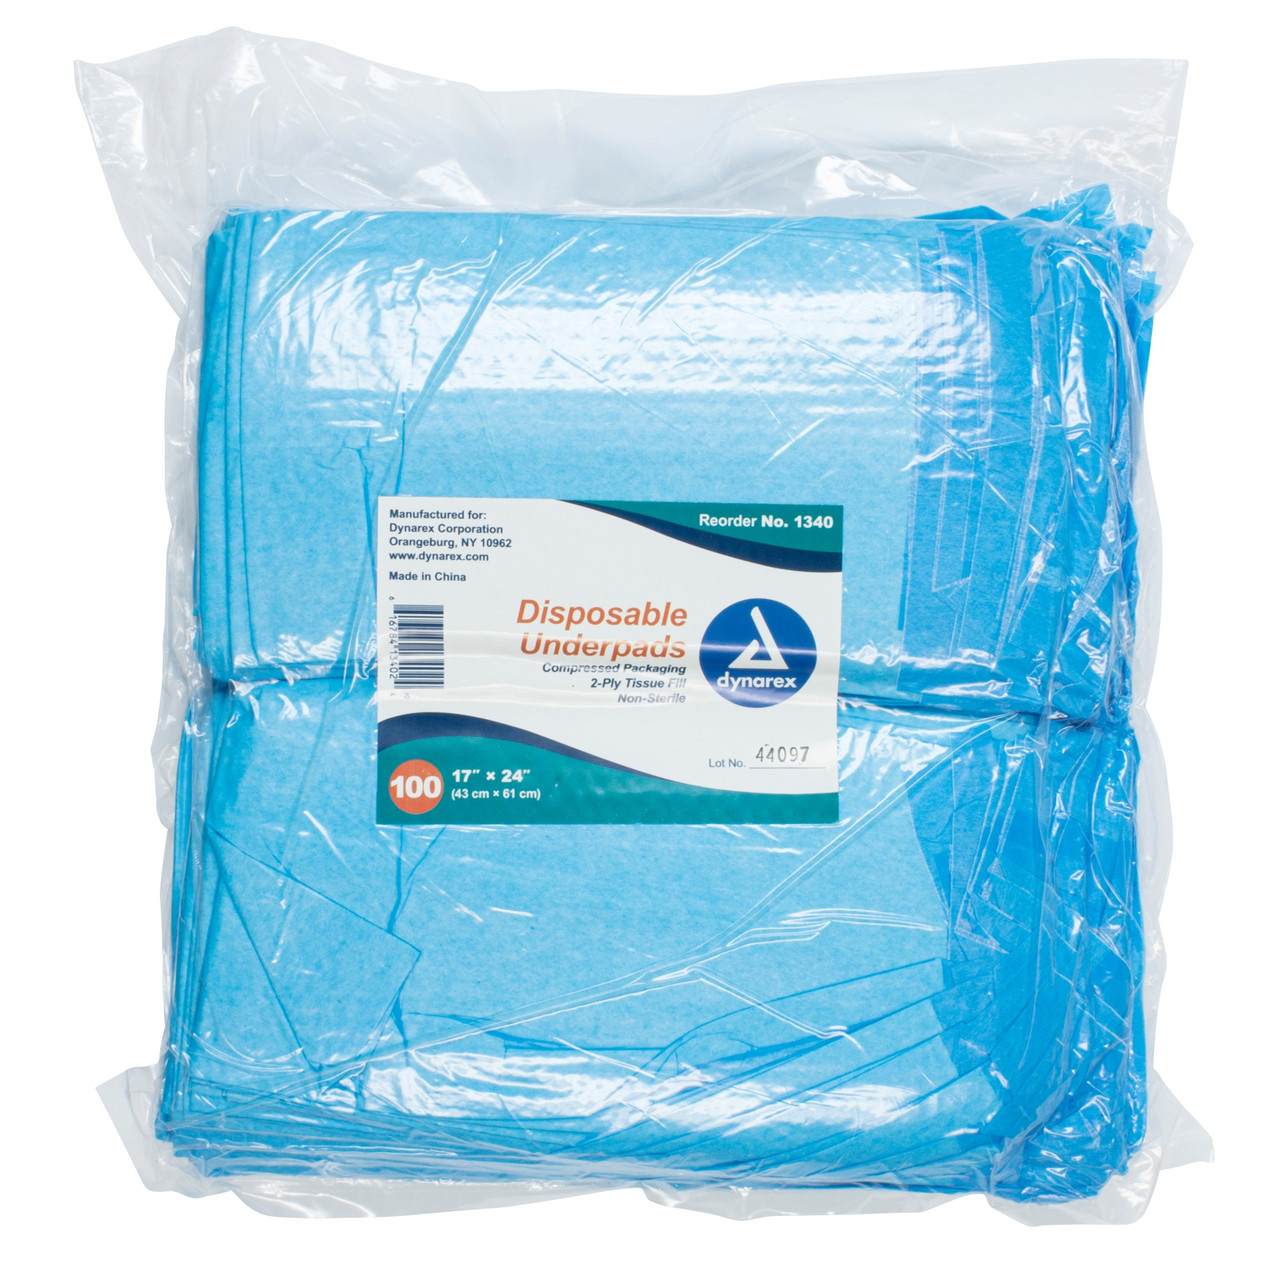 Dynarex Underpads, Light Absorbency - Fluff Core, Disposable - 17 in x 24  in - Simply Medical